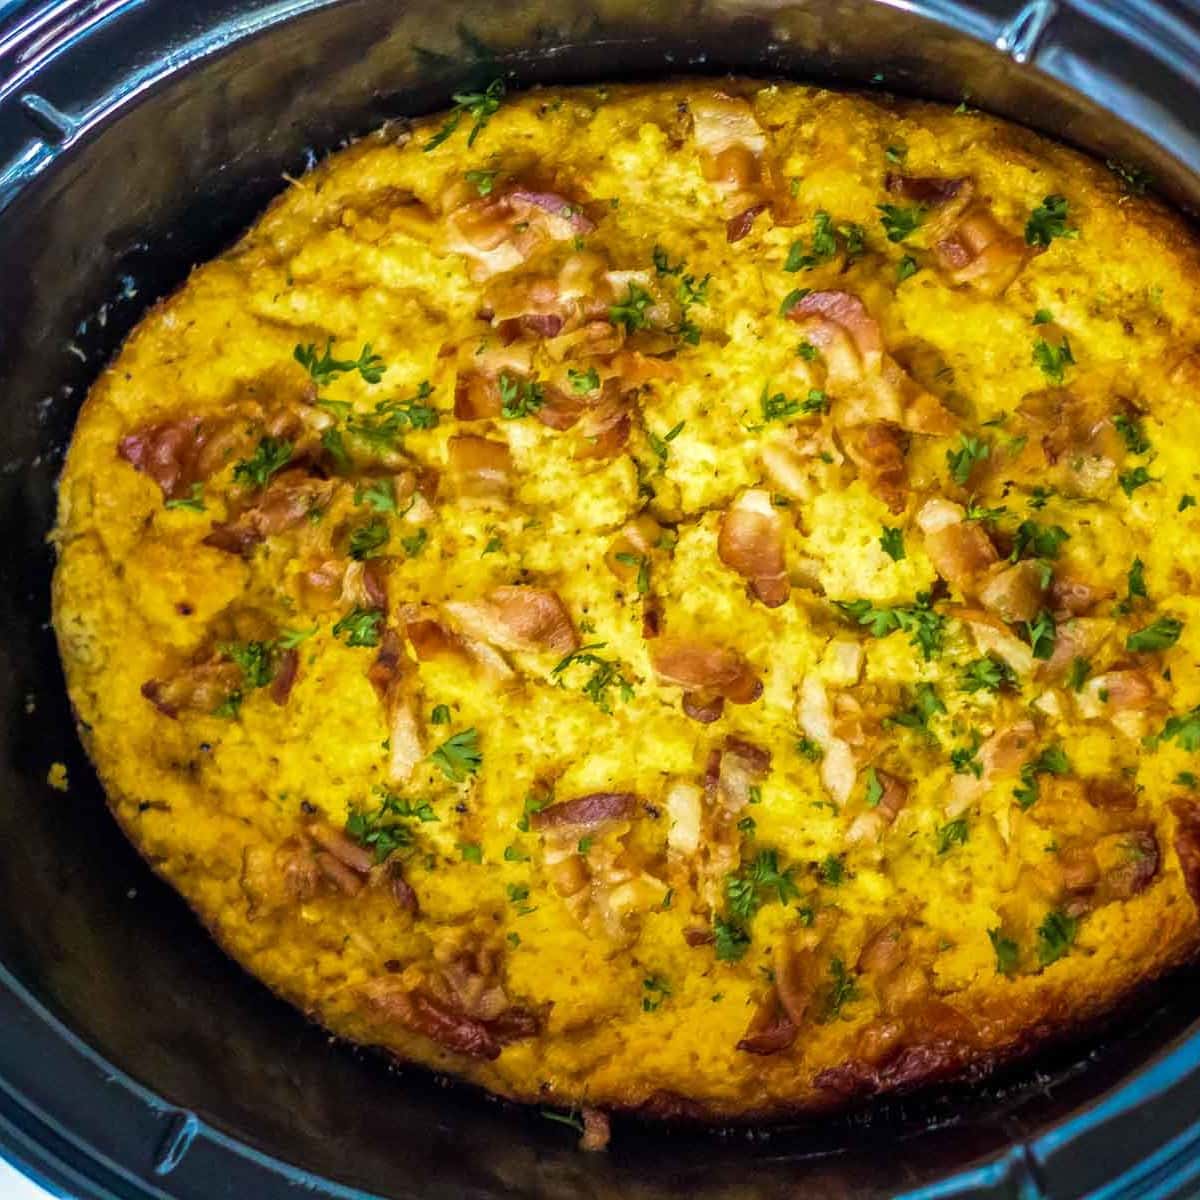 Top view of crock pot cornbread dressing with bacon and parsley on top.